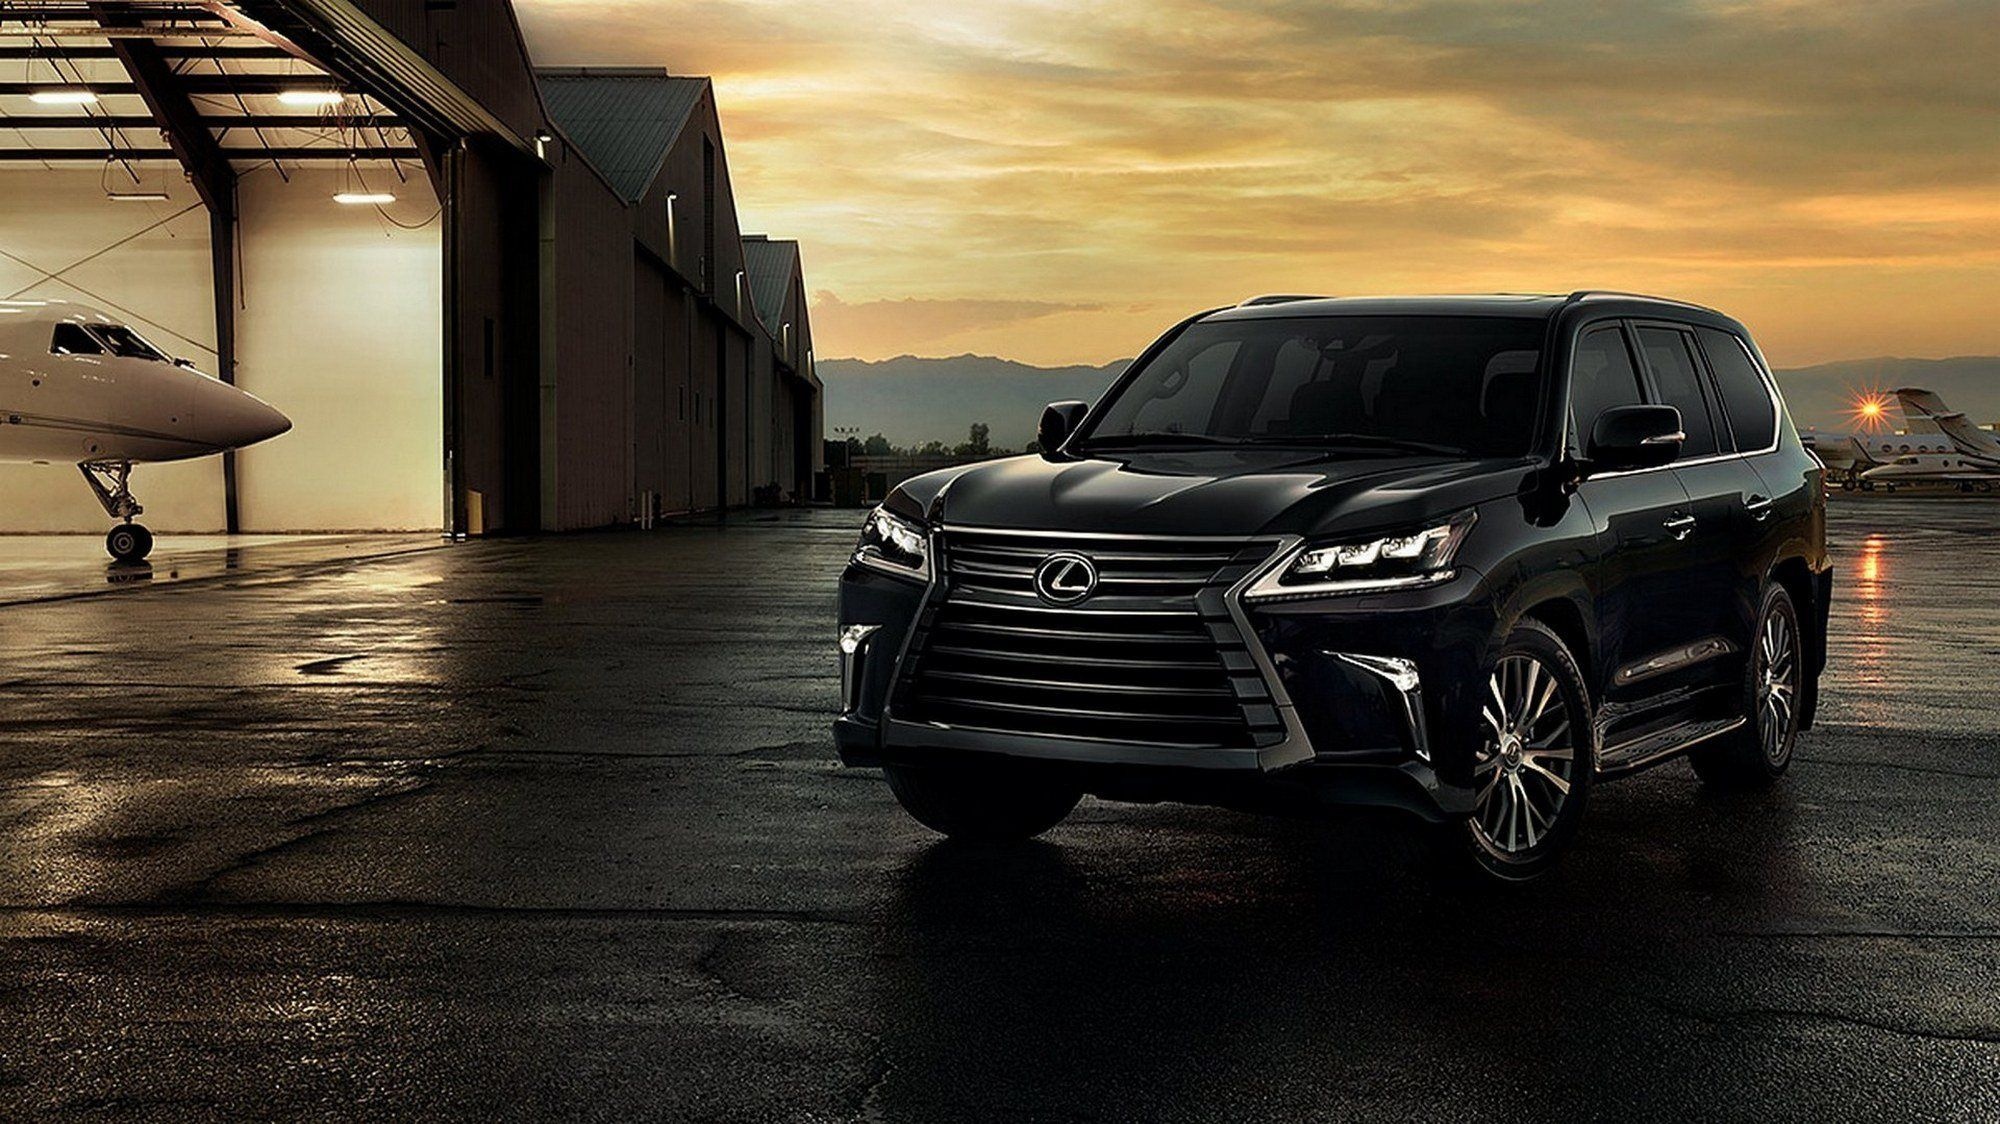 Lexus LX, Powerful and dynamic, Iconic LX design, Luxury and capability, 2000x1130 HD Desktop